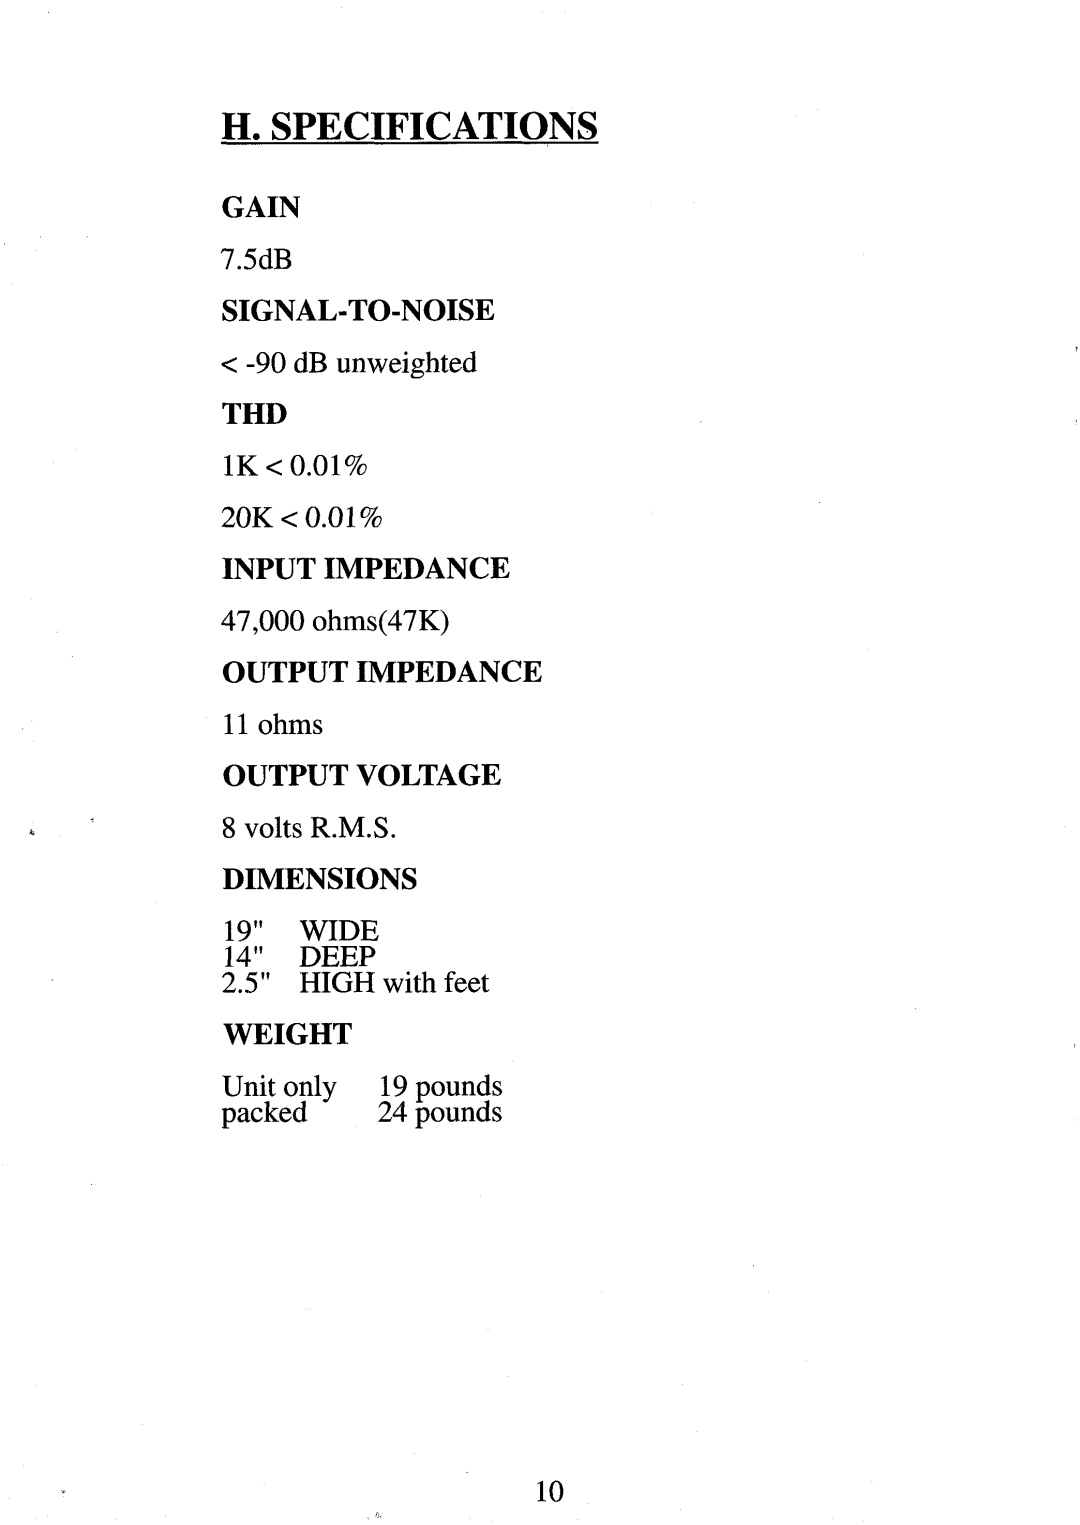 Krell Industries kSL-2 manual H. Specifications, Dimensions, Weight 